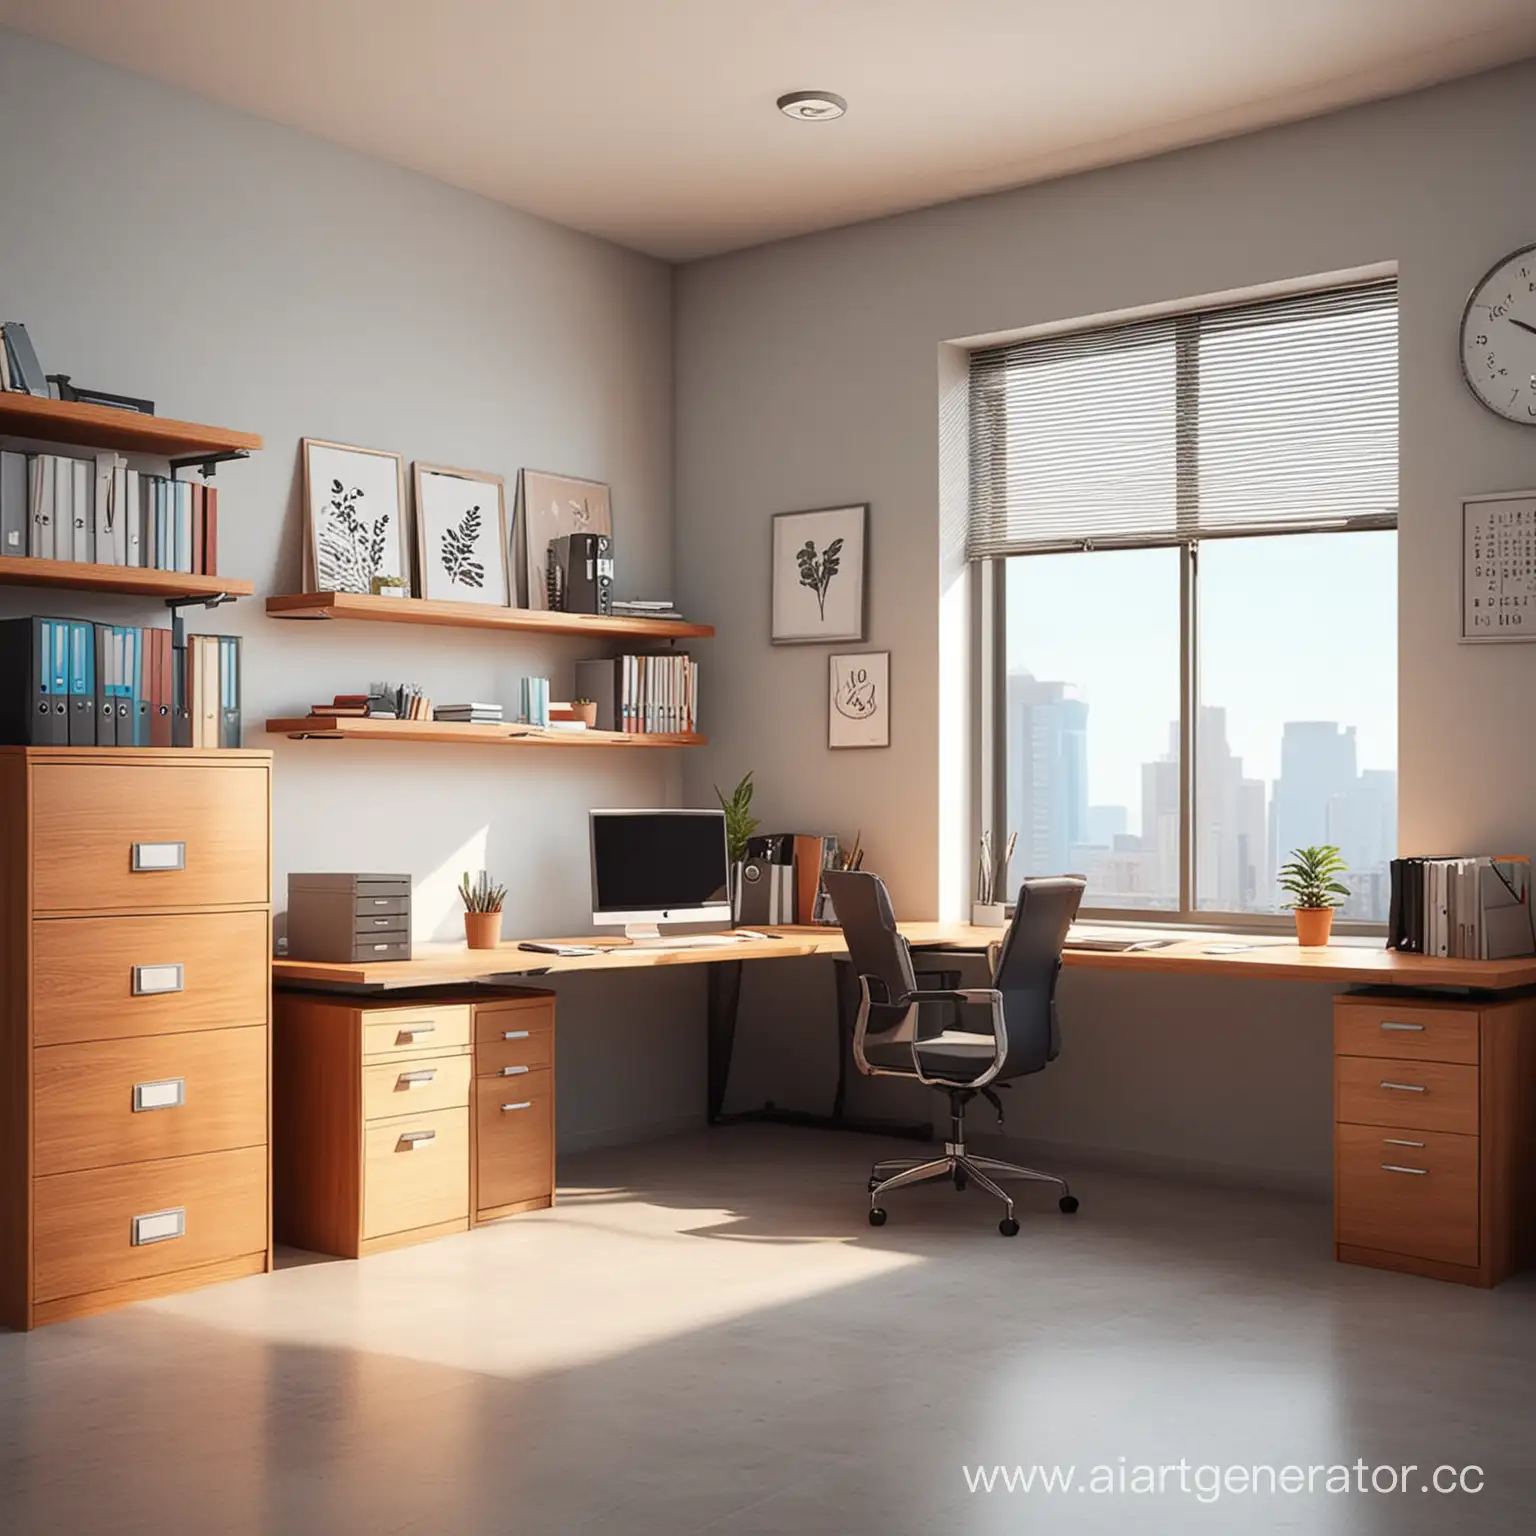 Cartoon-Office-Interior-with-Vibrant-Colors-and-Playful-Characters